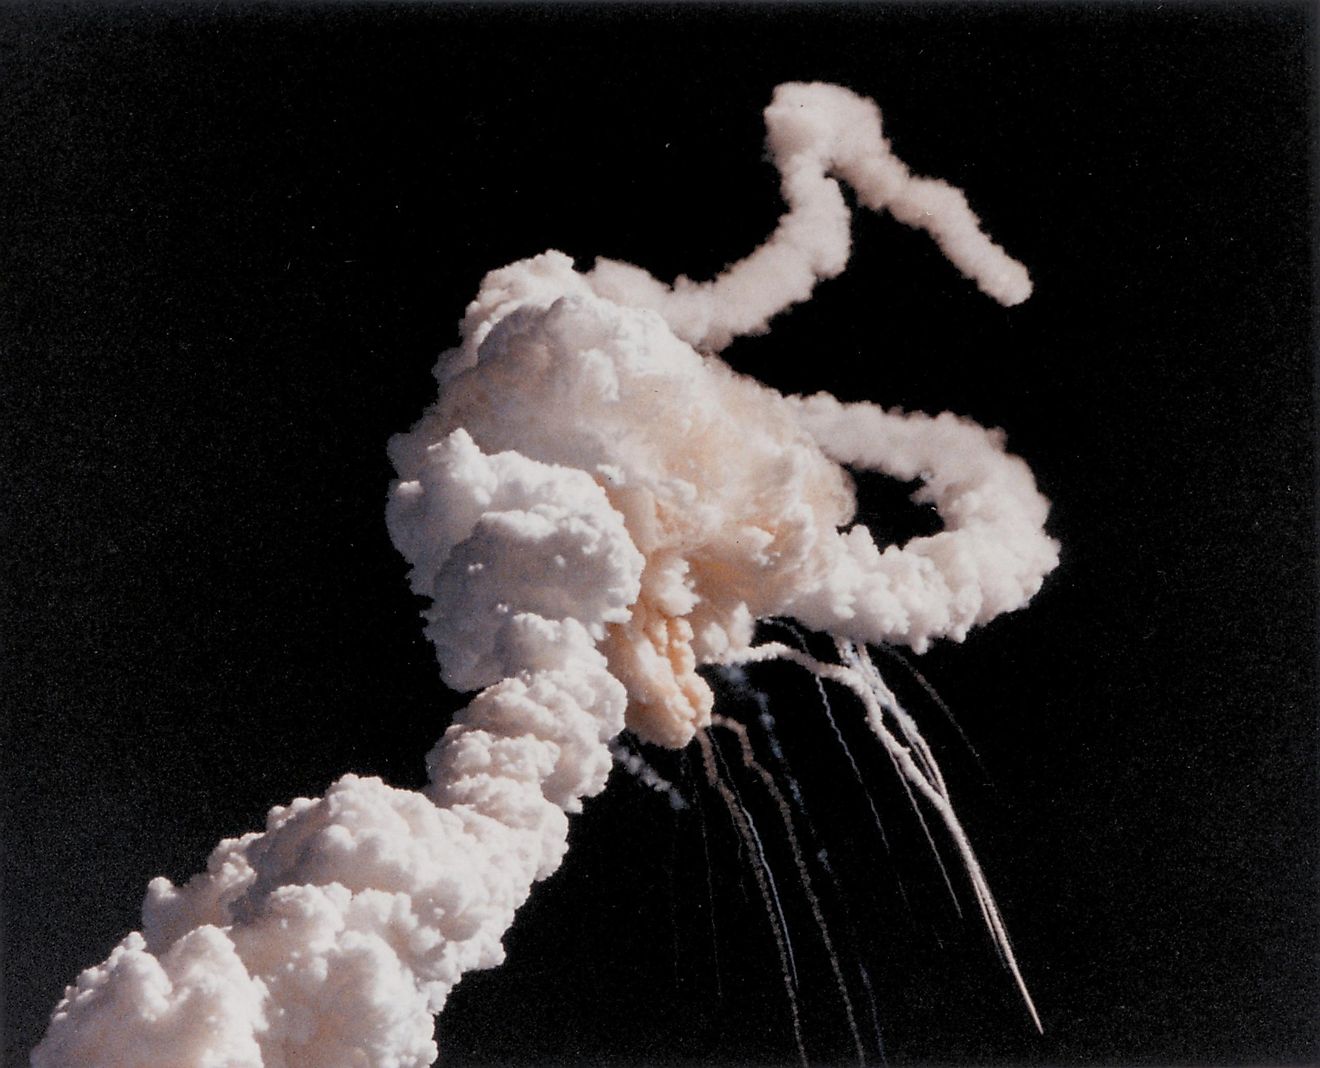 Space shuttle Challenger disaster. Space shuttle exhaust plumes entwined around a ball of gas after a few seconds after the explosion caused by ruptured O-rings. Imagecredit: Everett Historical / Shutterstock.com